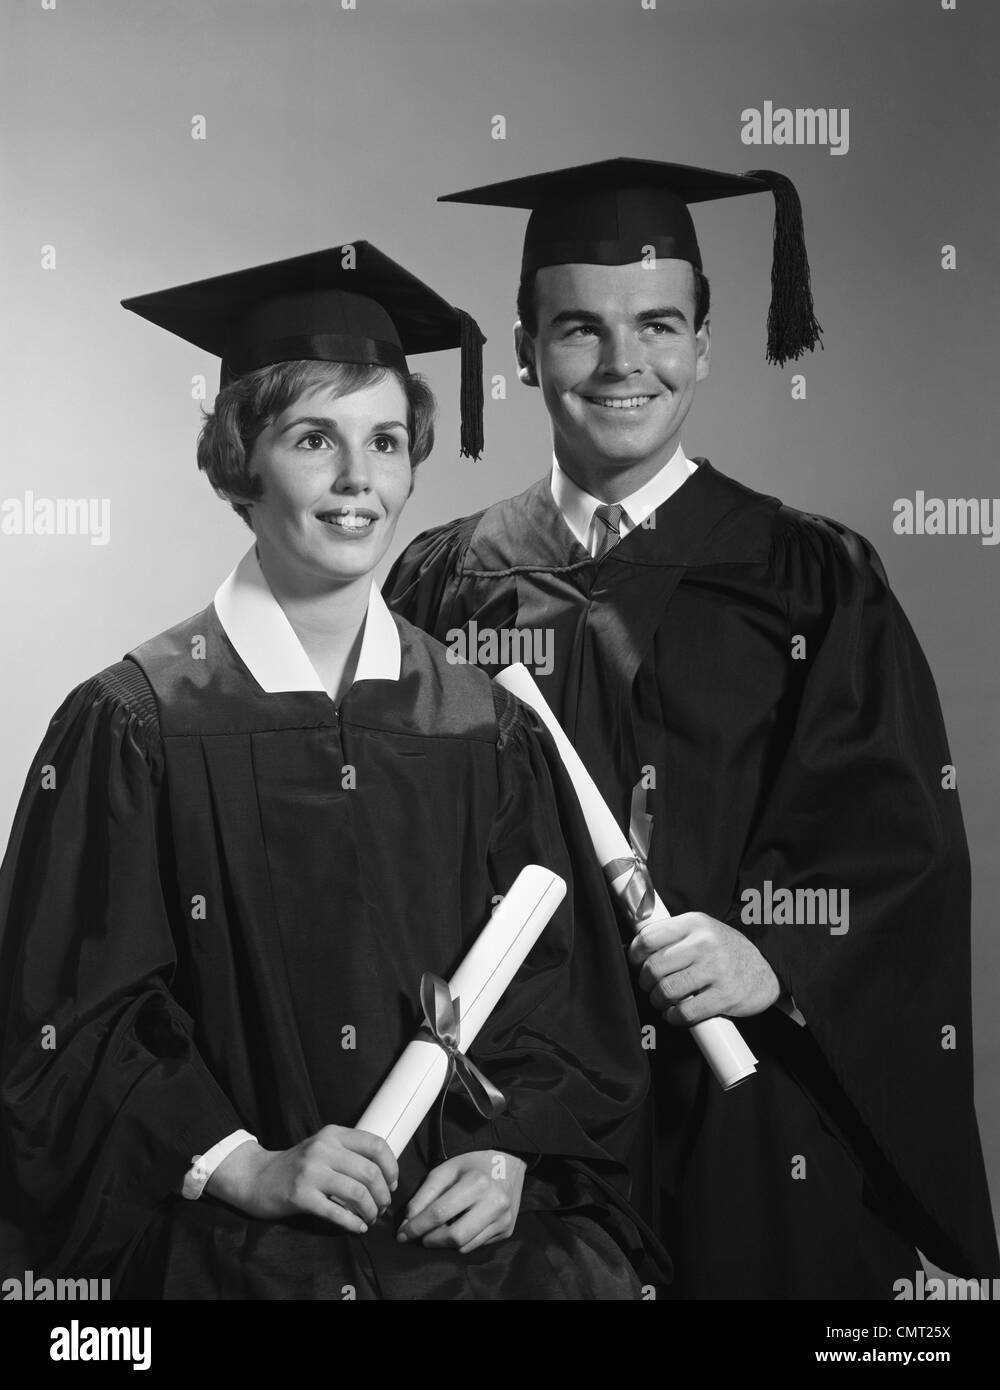 1960s PORTRAIT COUPLE MAN WOMAN IN GRADUATION ROBES HOLDING DIPLOMAS SMILING Stock Photo